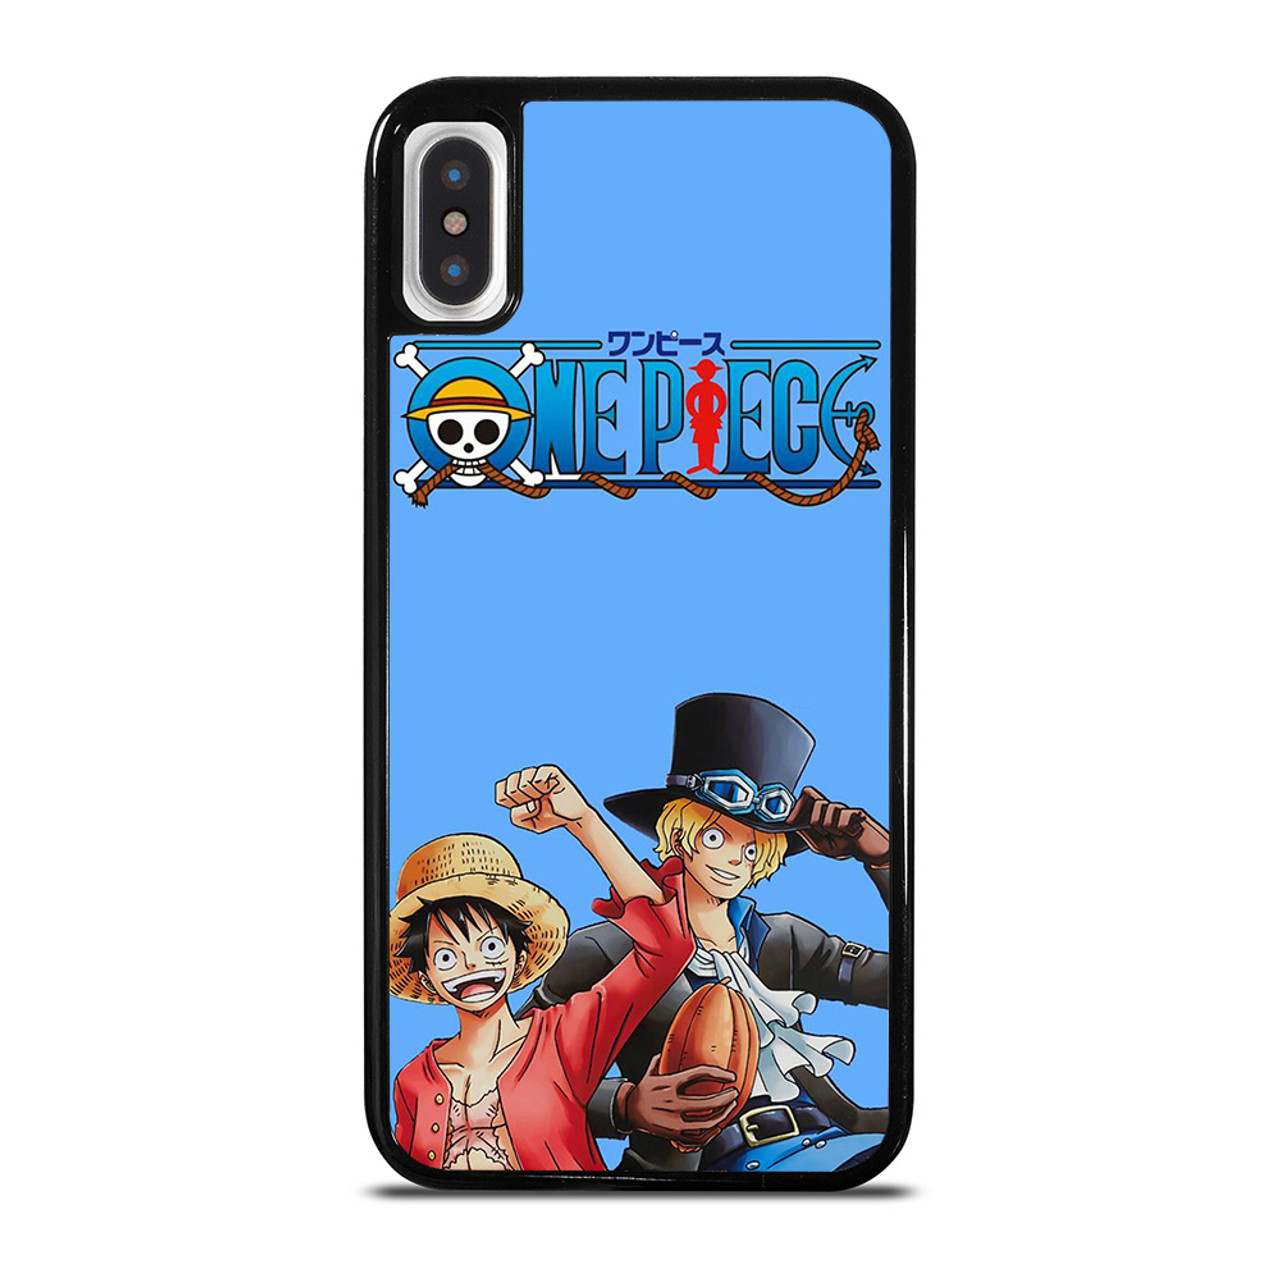 ONE PIECE LUFFY AND SABO iPhone X / XS Case Cover